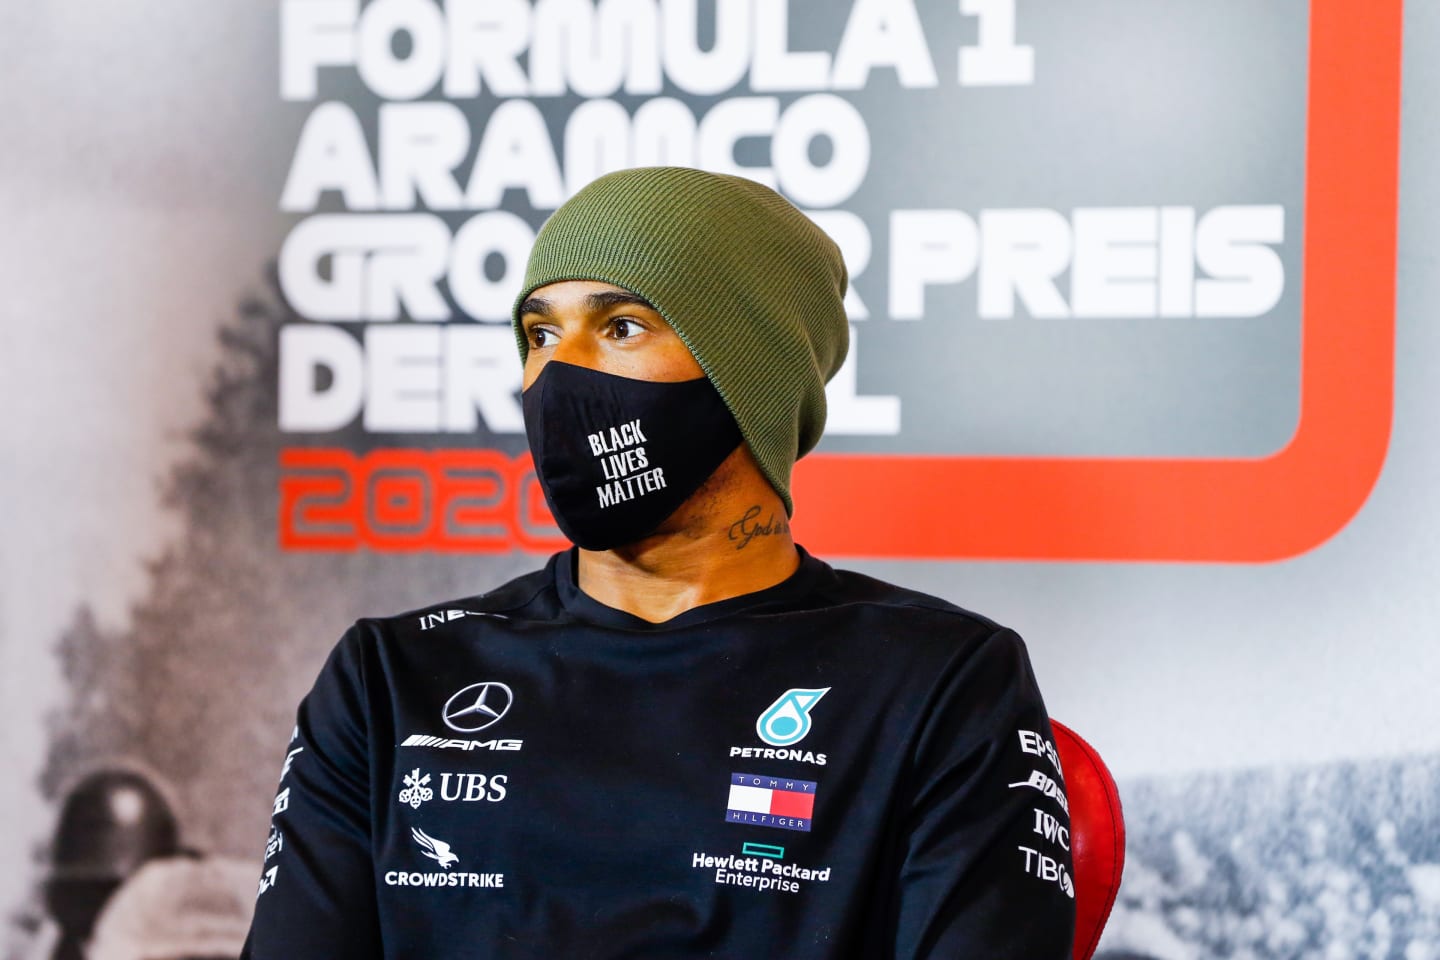 NUERBURG, GERMANY - OCTOBER 10: Second place qualifier Lewis Hamilton of Great Britain and Mercedes GP talks in a press conference after qualifying ahead of the F1 Eifel Grand Prix at Nuerburgring on October 10, 2020 in Nuerburg, Germany. (Photo by Antonin Vincent - Pool/Getty Images)